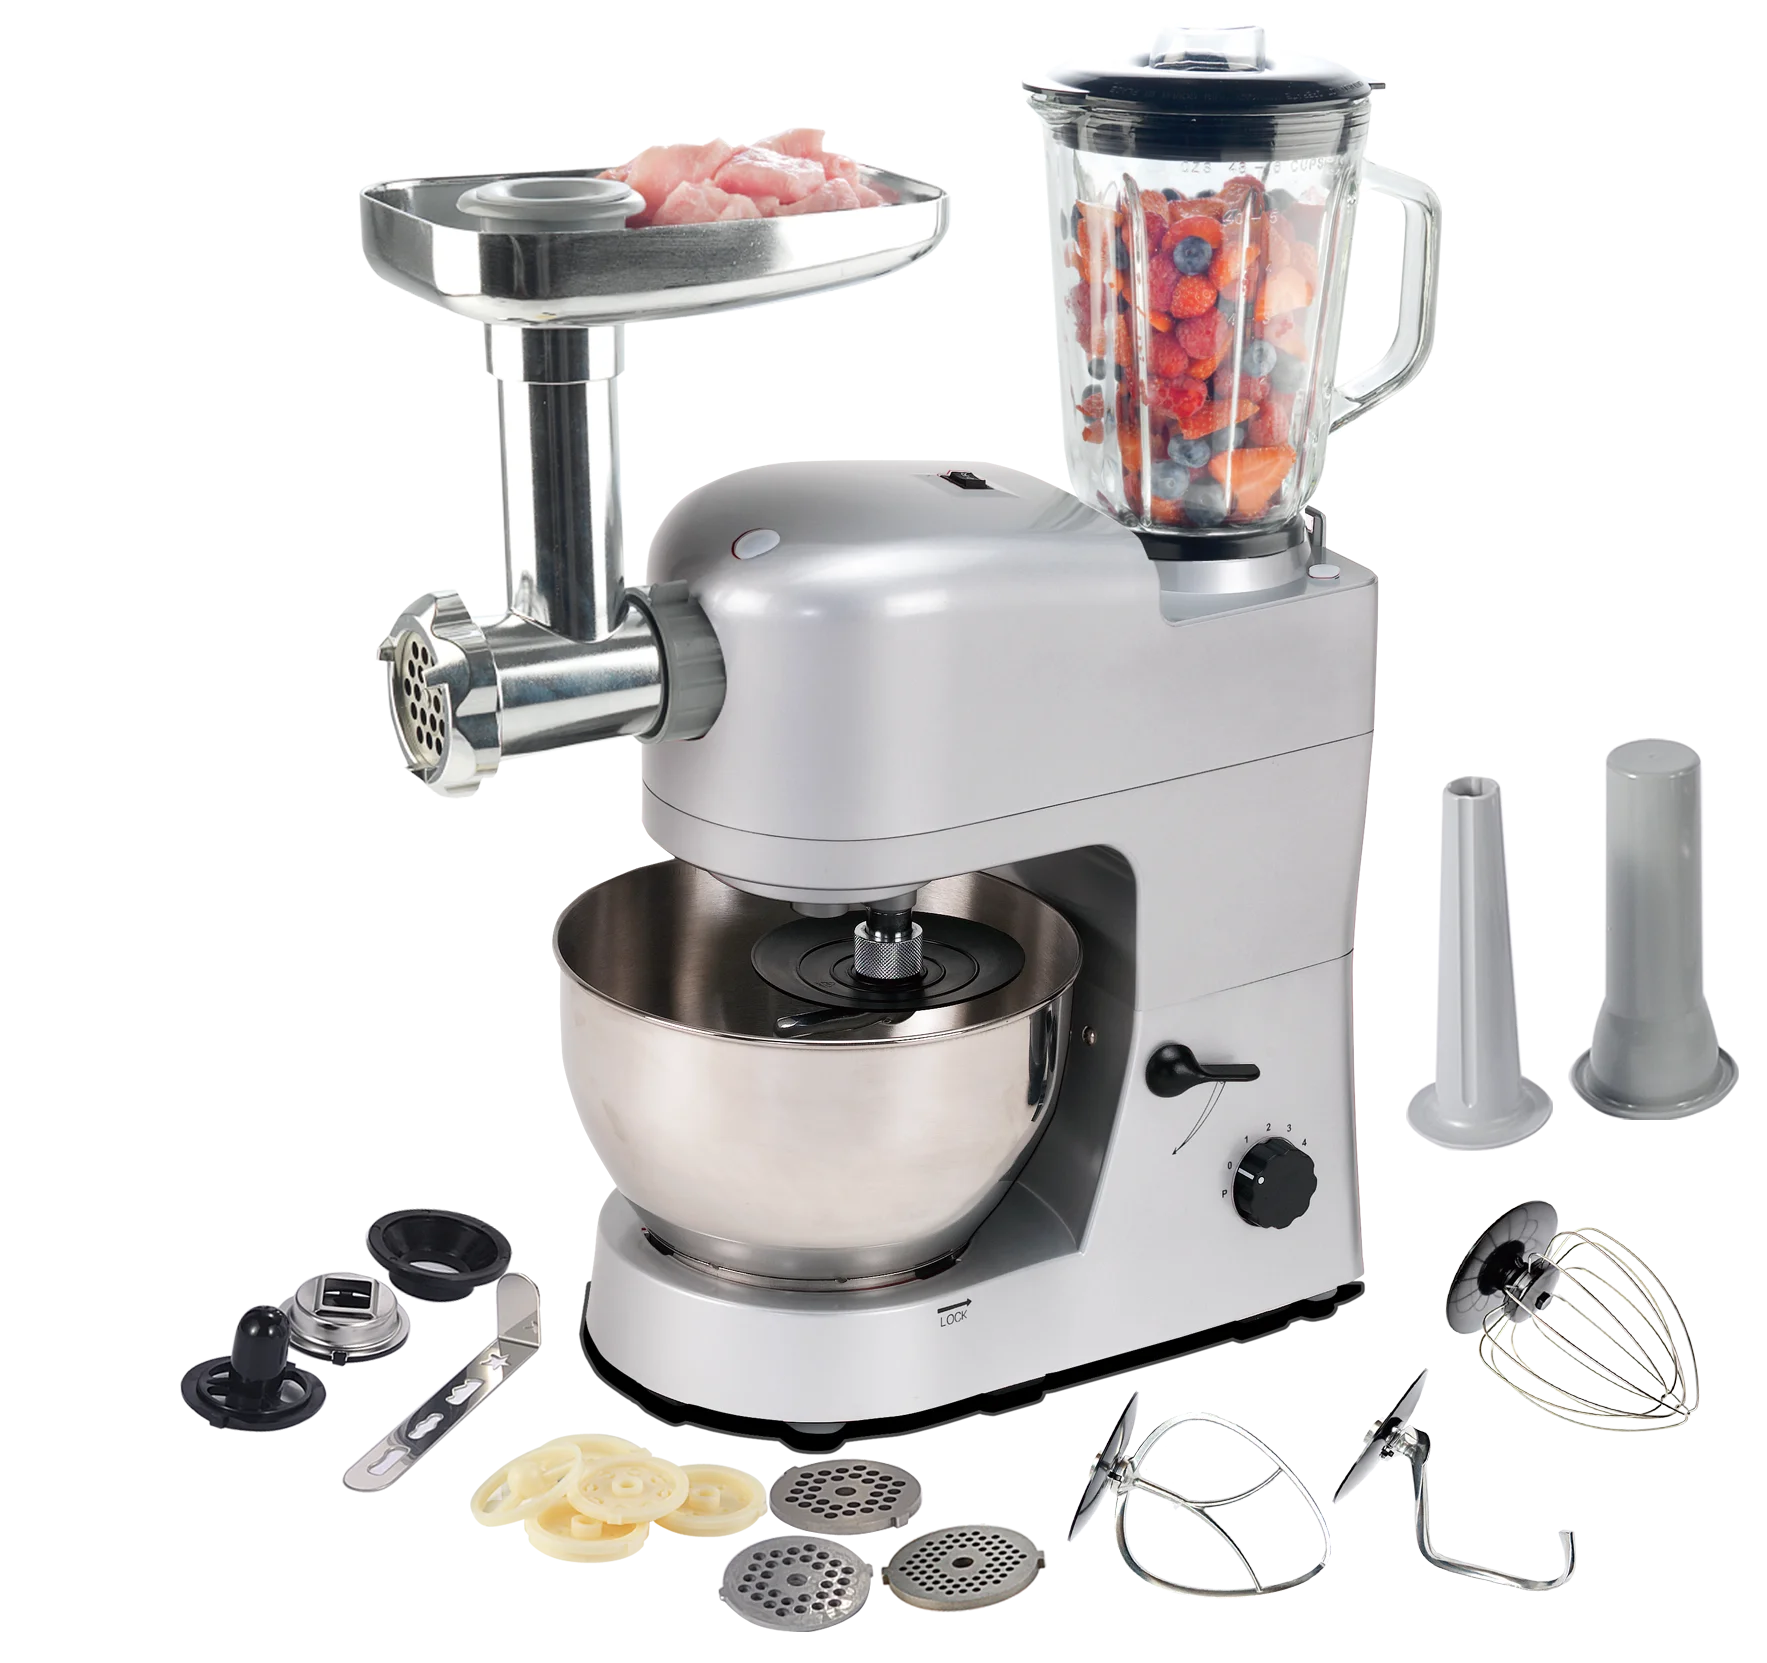 Planetary large stand food mixer